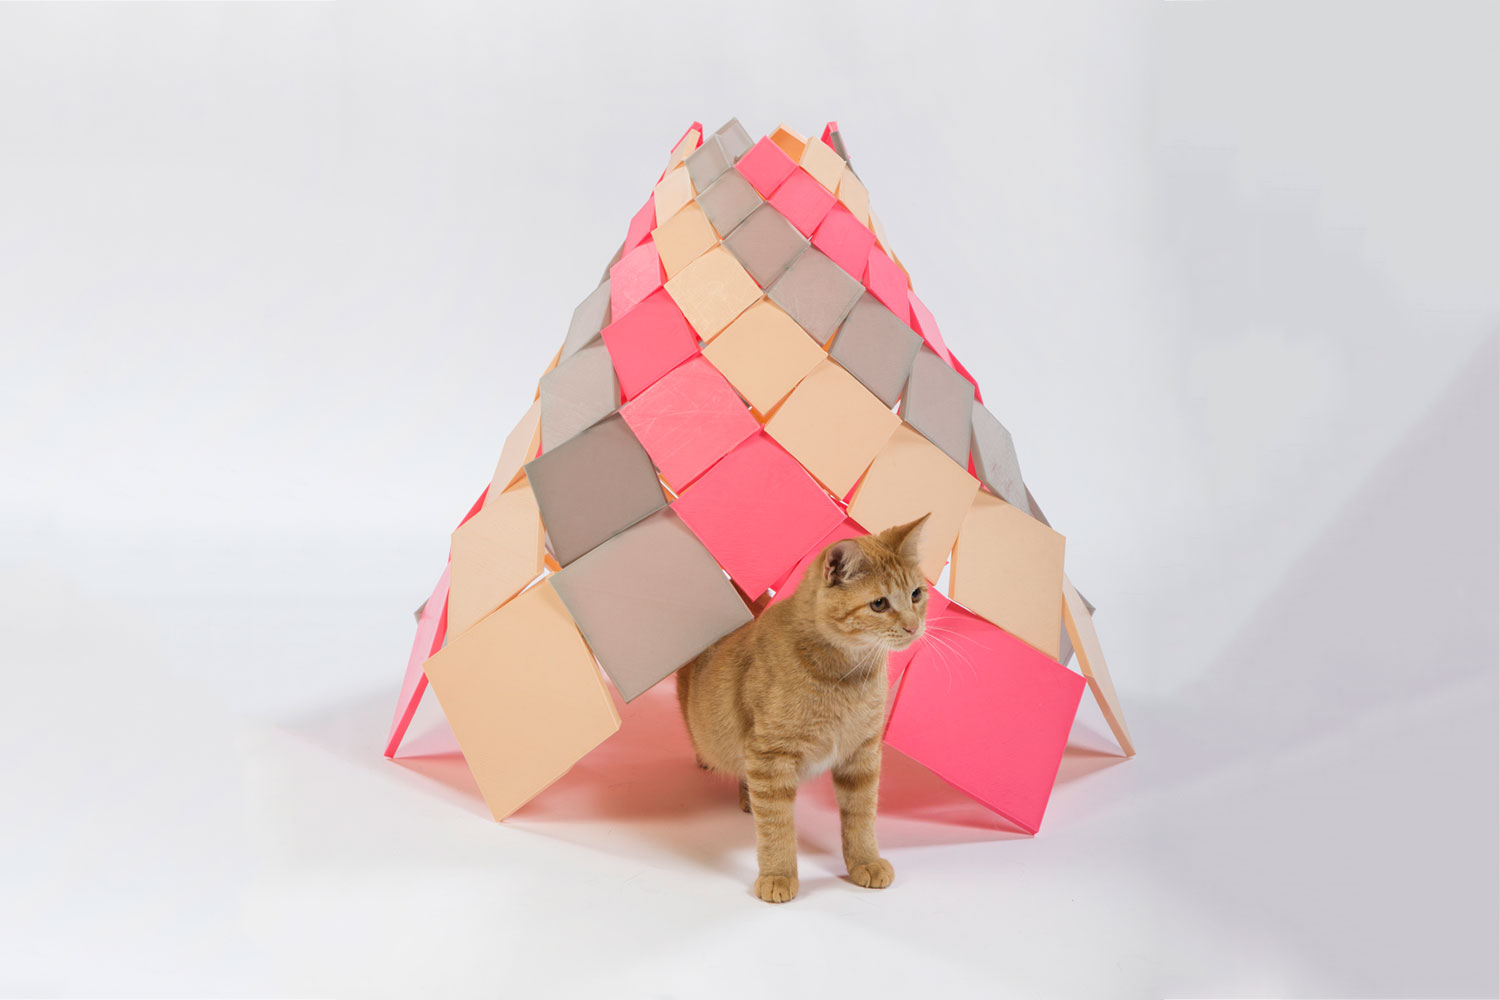 architects for animals design amazing cat houses dsh architecture  photo credit meghan bob photography